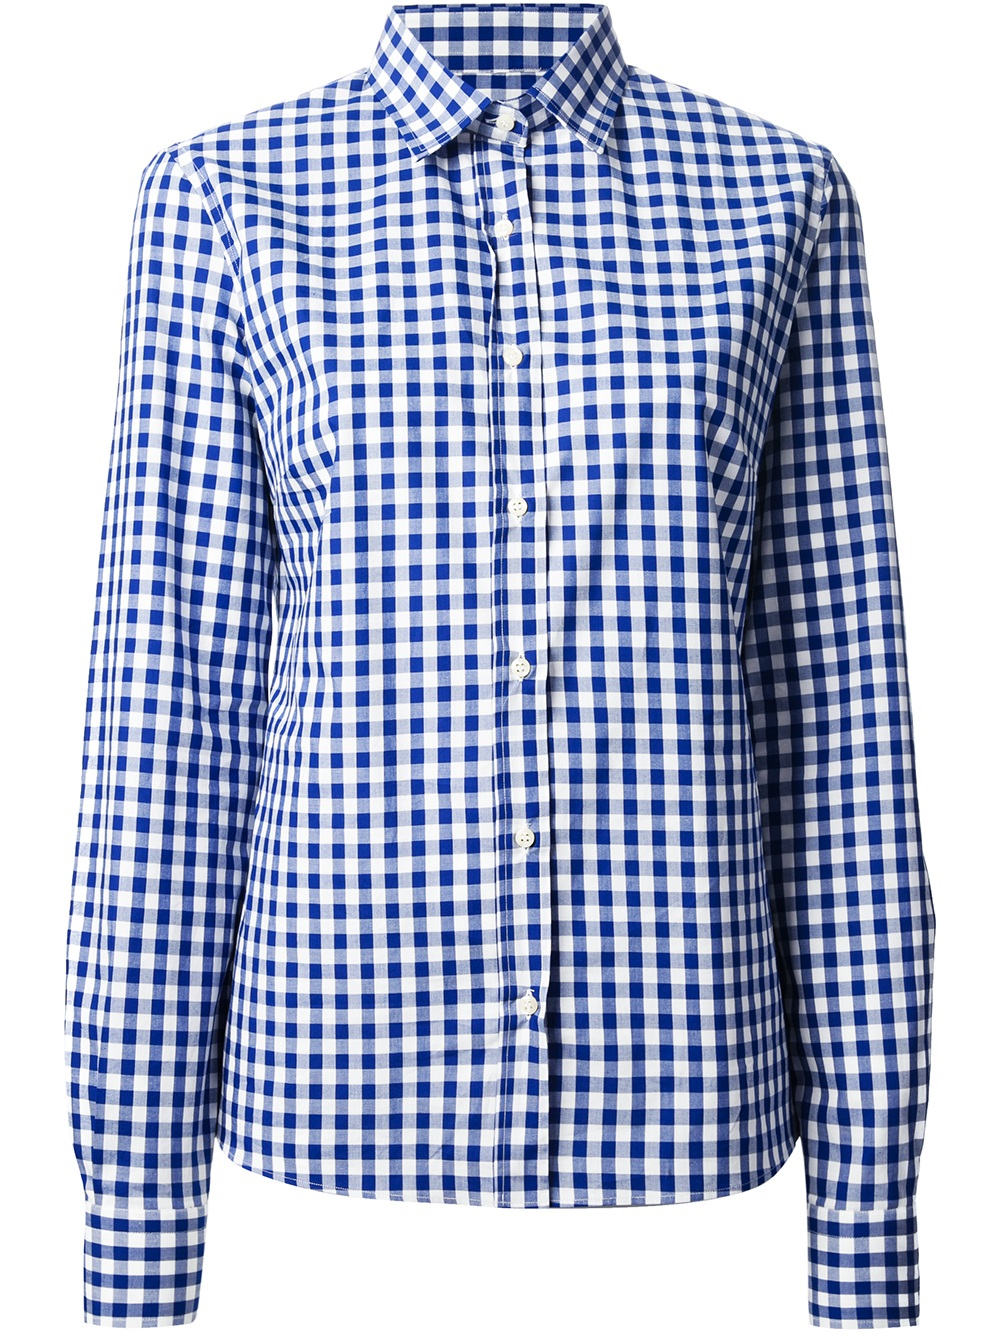 Lyst - Stella Jean Gingham Check Shirt in Blue